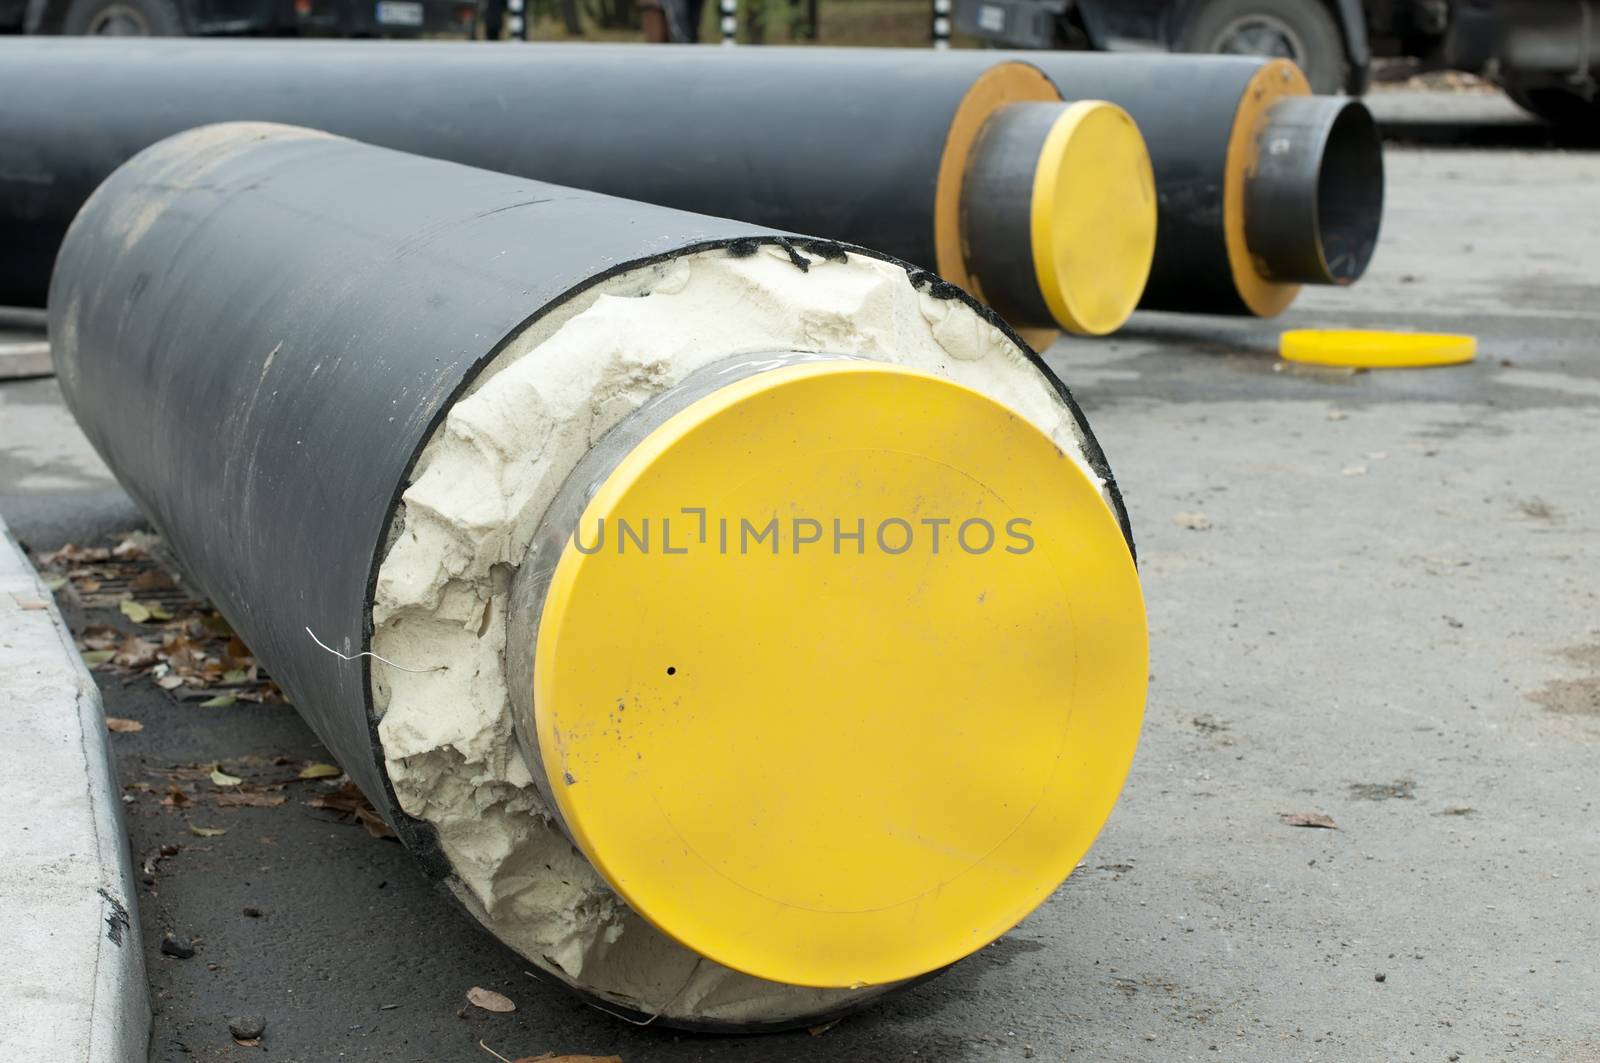 Pipes for hot water and steam heating. City heat pipeline